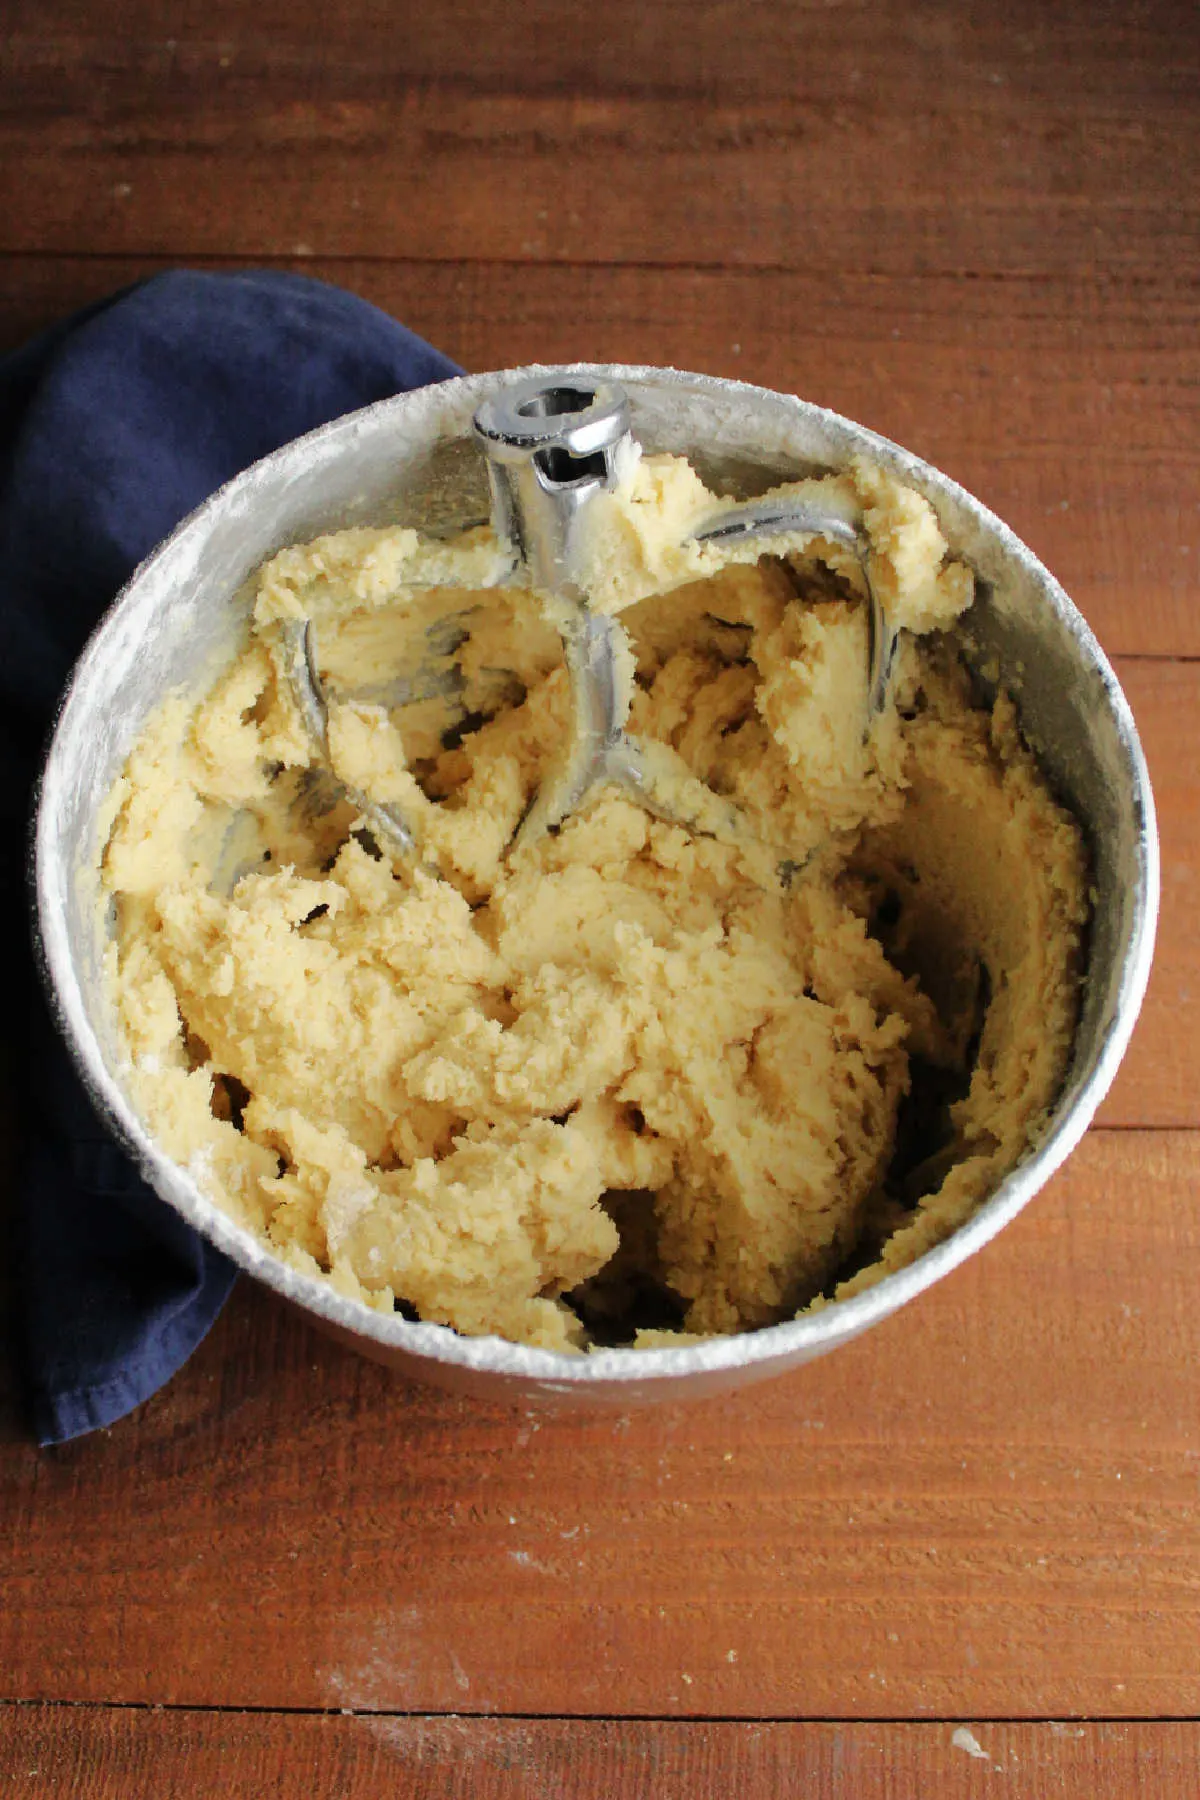 Mixer bowl filled with soft vanilla sugar cookie dough and mixer paddle, ready to chill.